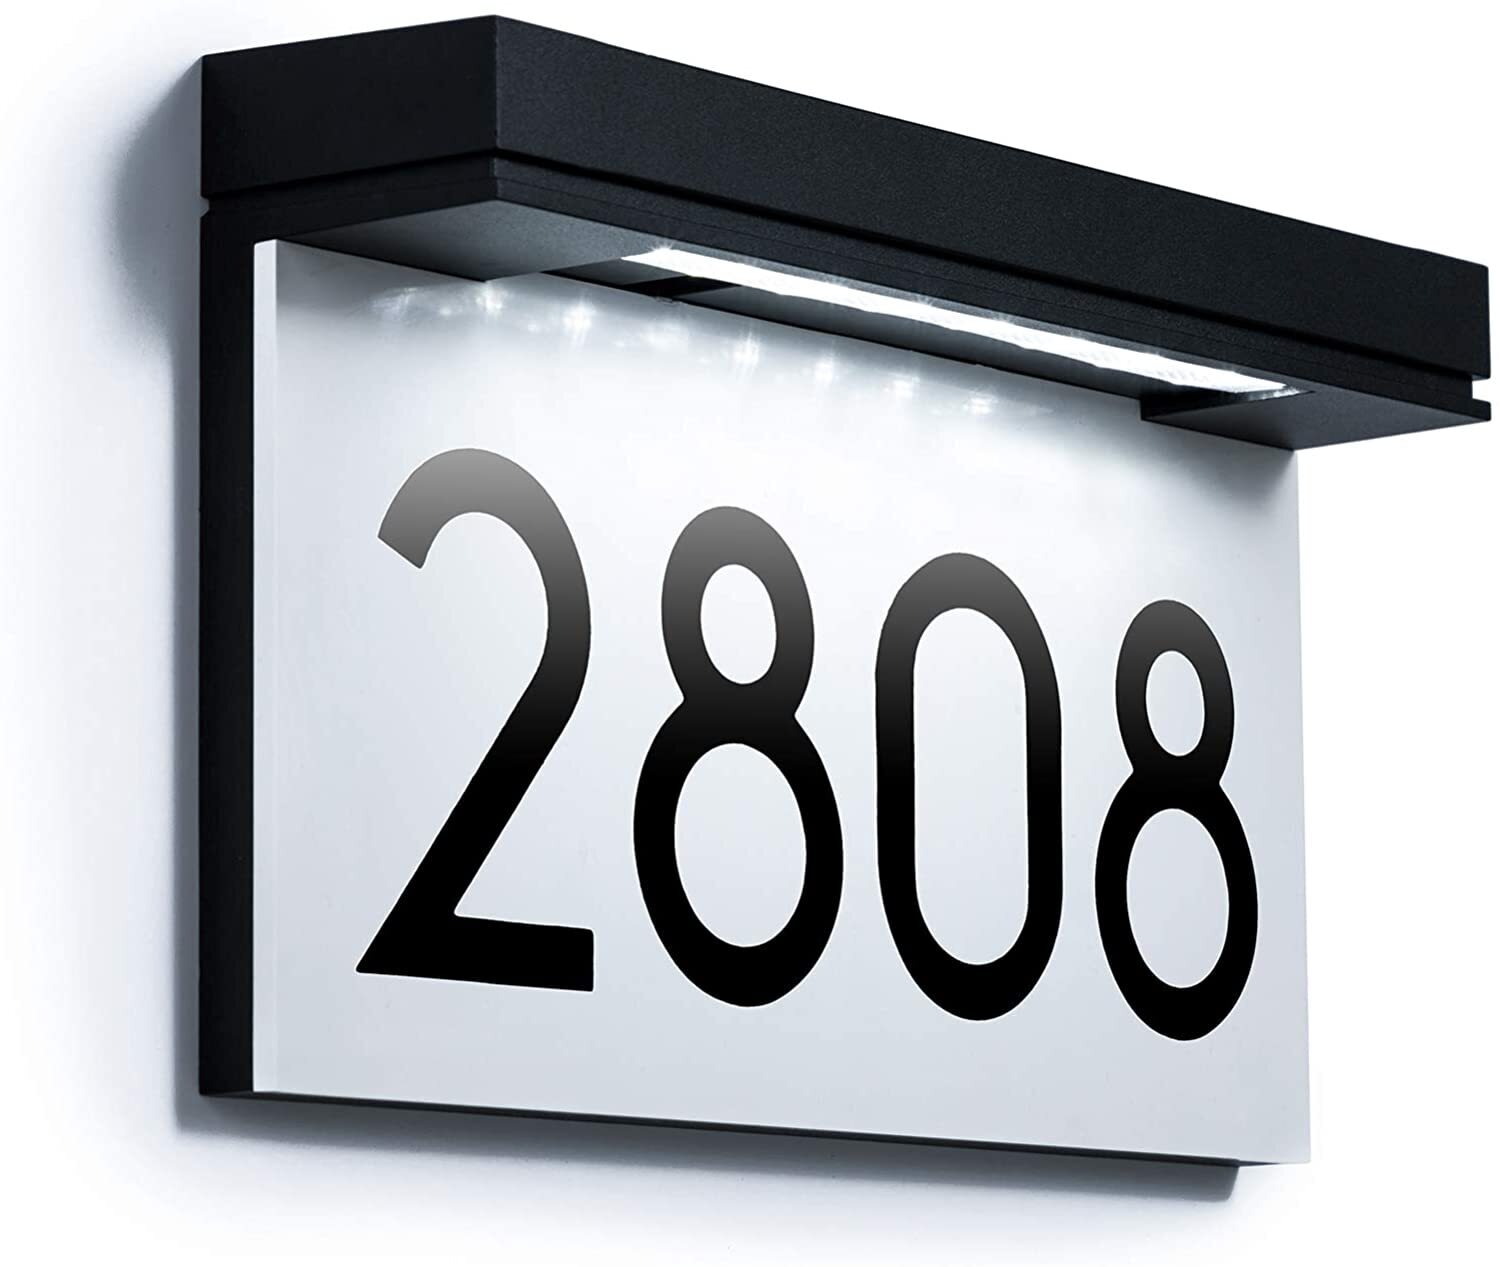 Solar Powered LED Light House Number Door Sign Plaque Street Address LampS P7C5 